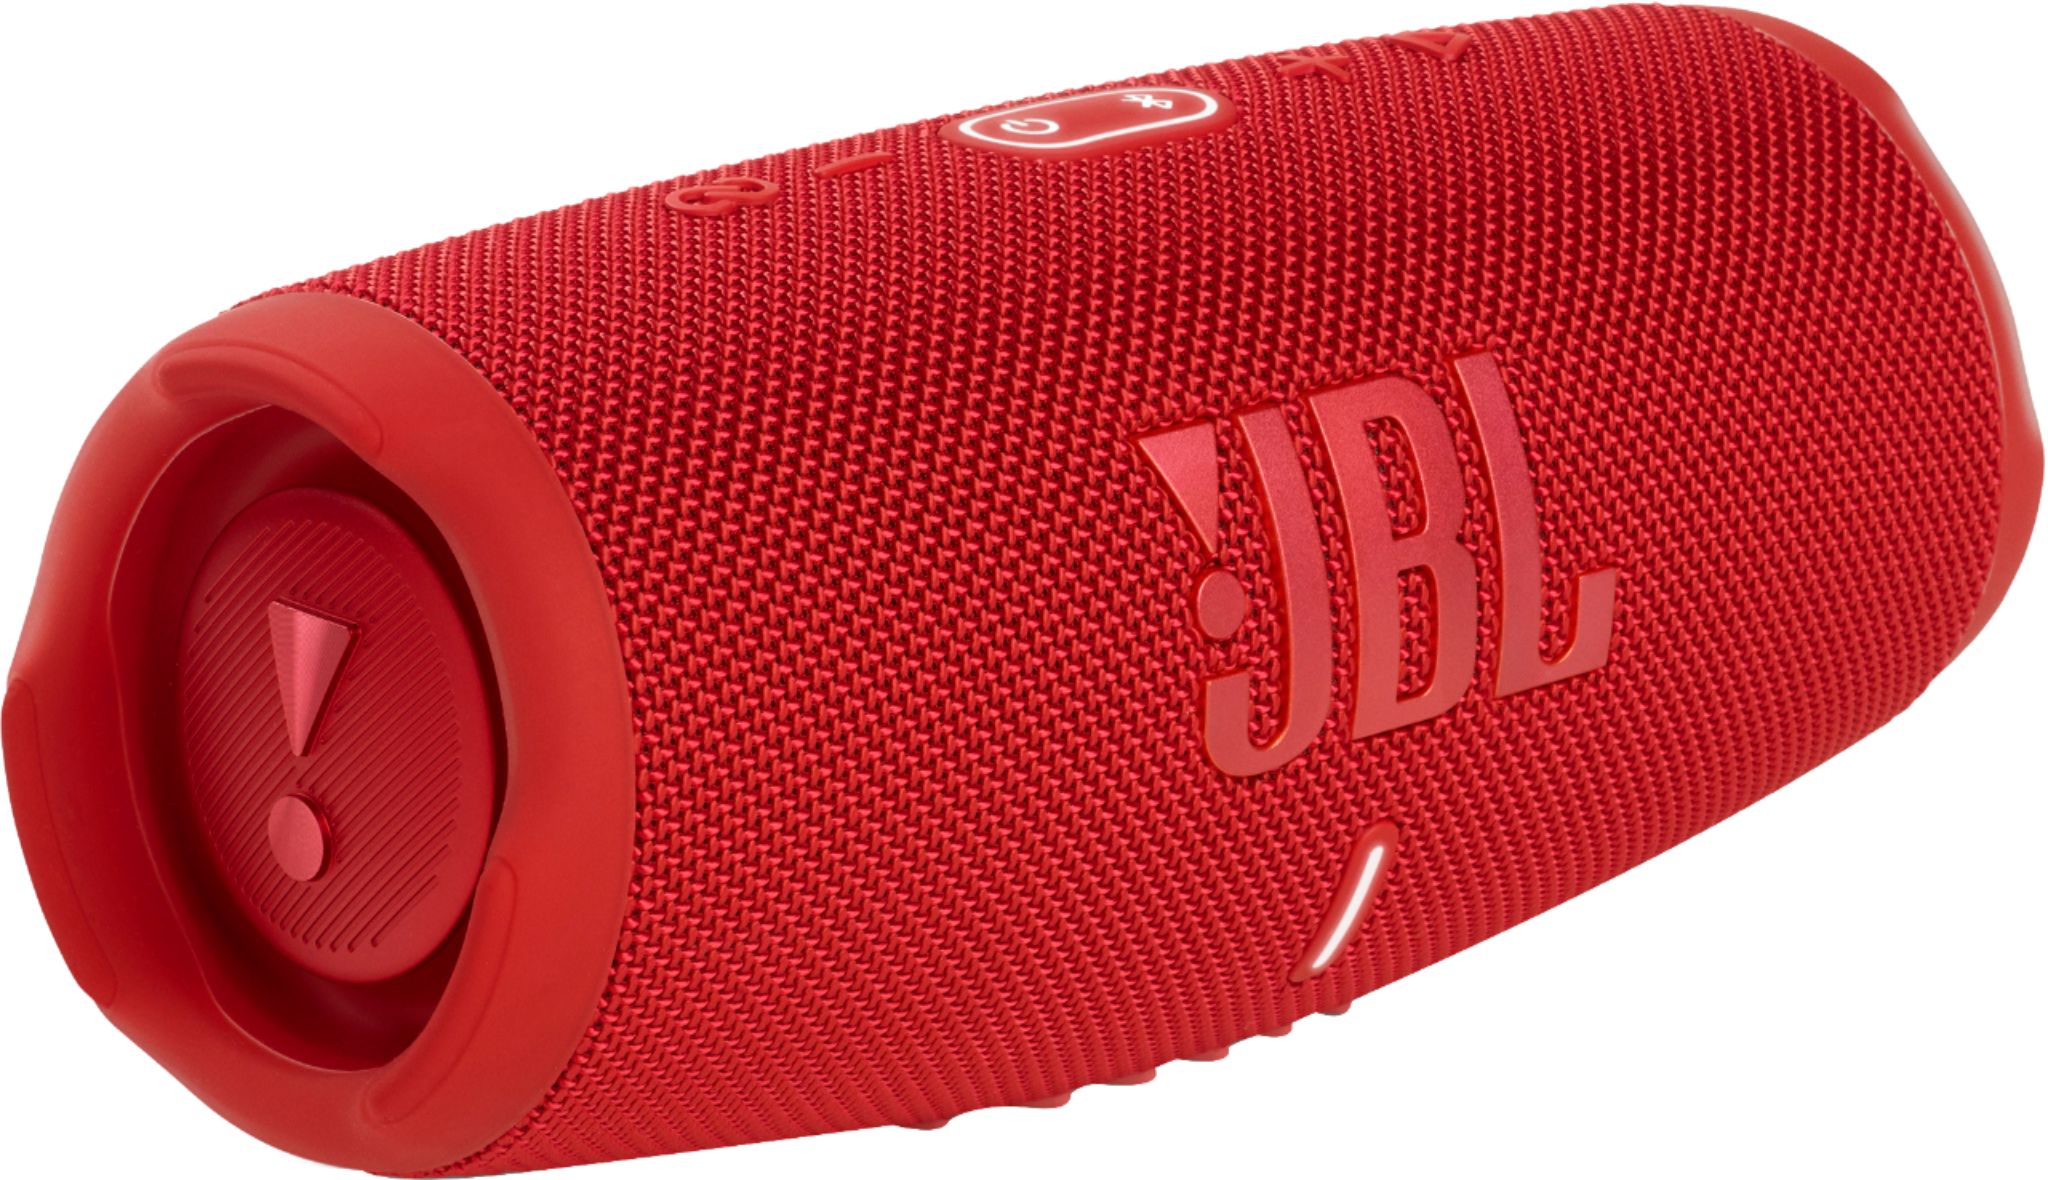 Questions and Answers JBL CHARGE5 Portable Waterproof Speaker with